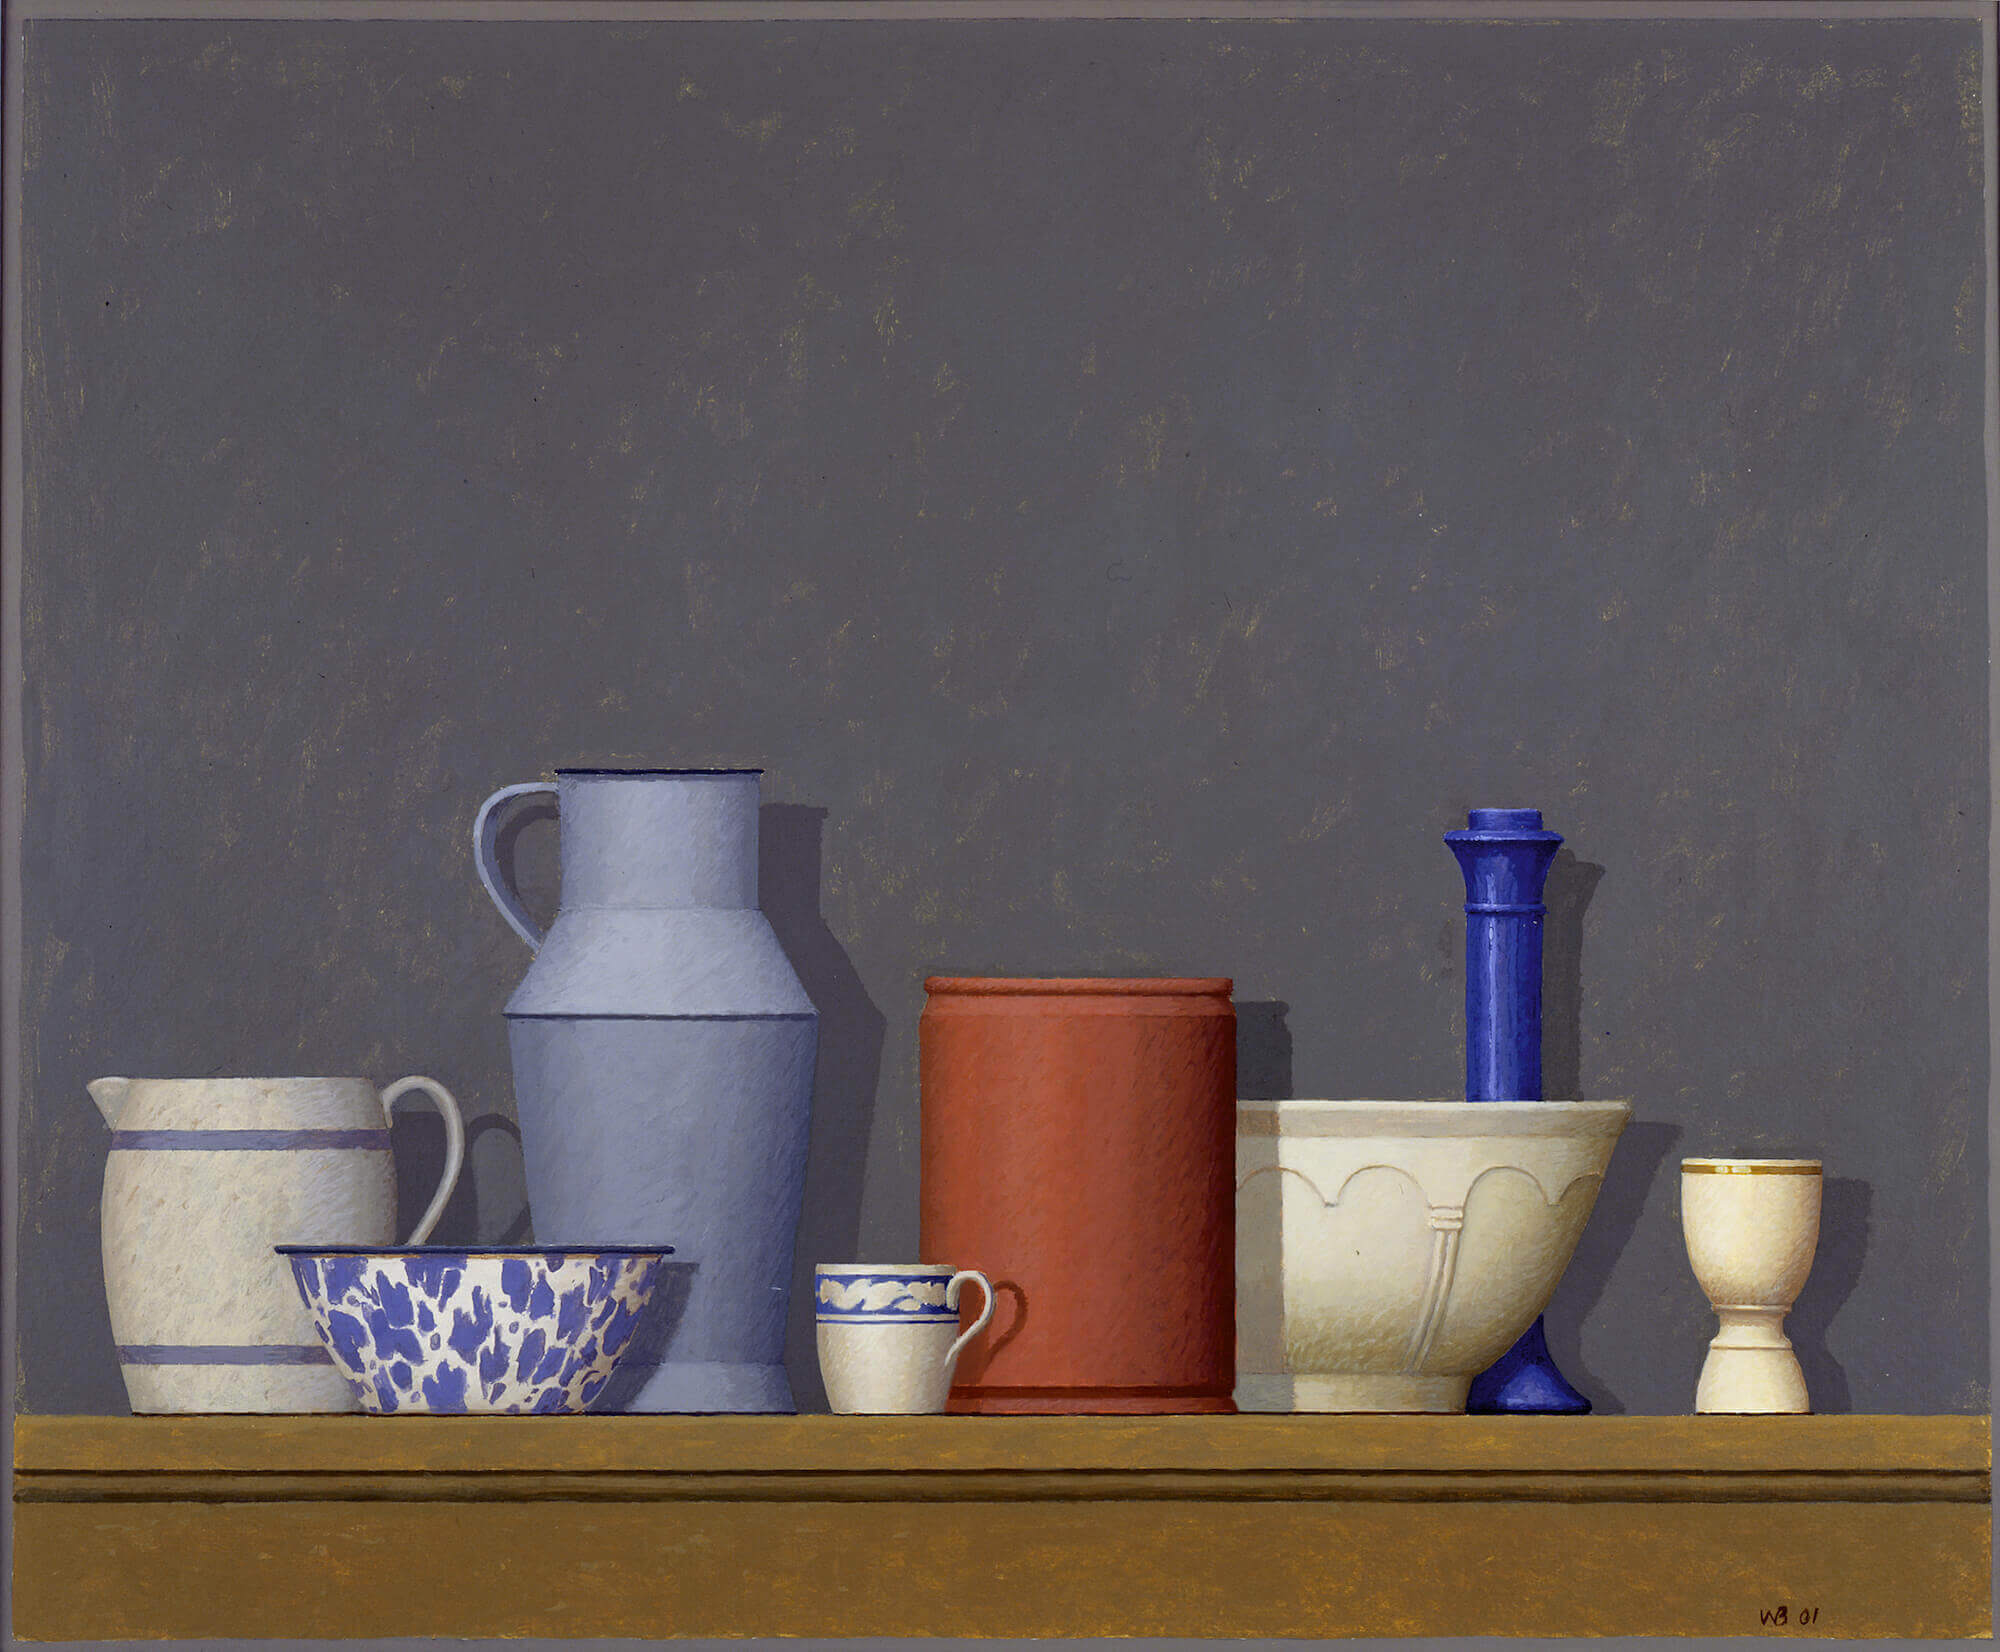 William Bailey, Pianello, 2001, tempera on paper, 18 x 22 inches (courtesy of the artist and Betty Cuningham Gallery)